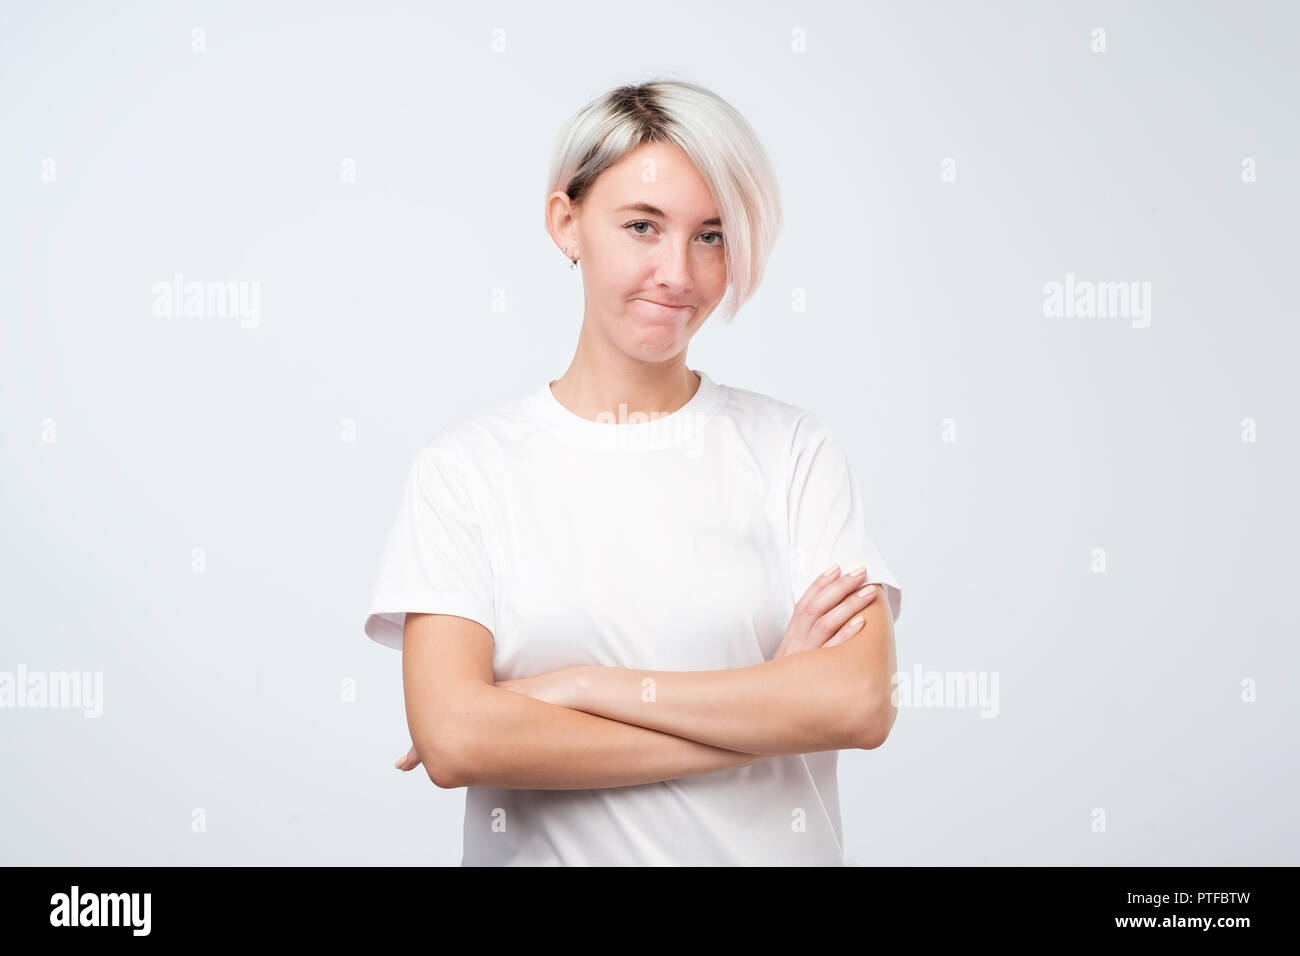 Suspicion, mistrust and distrust concept. Doubtful woman with short colored hair looking with disbelief expression Stock Photo